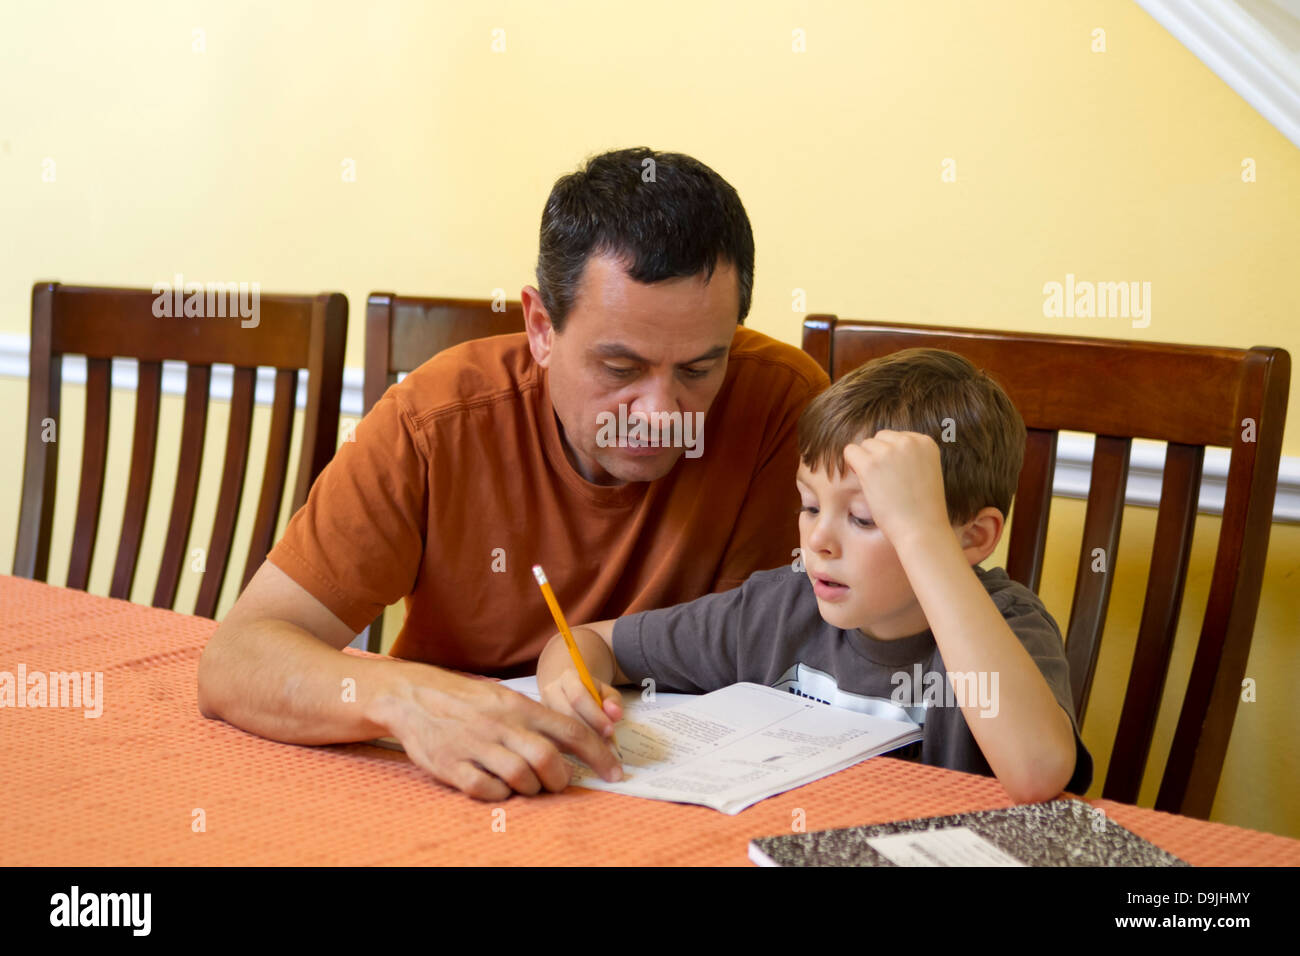 Mexican-American father ( 50 year old) helps out his Hispanic 7 year old son with homework Stock Photo